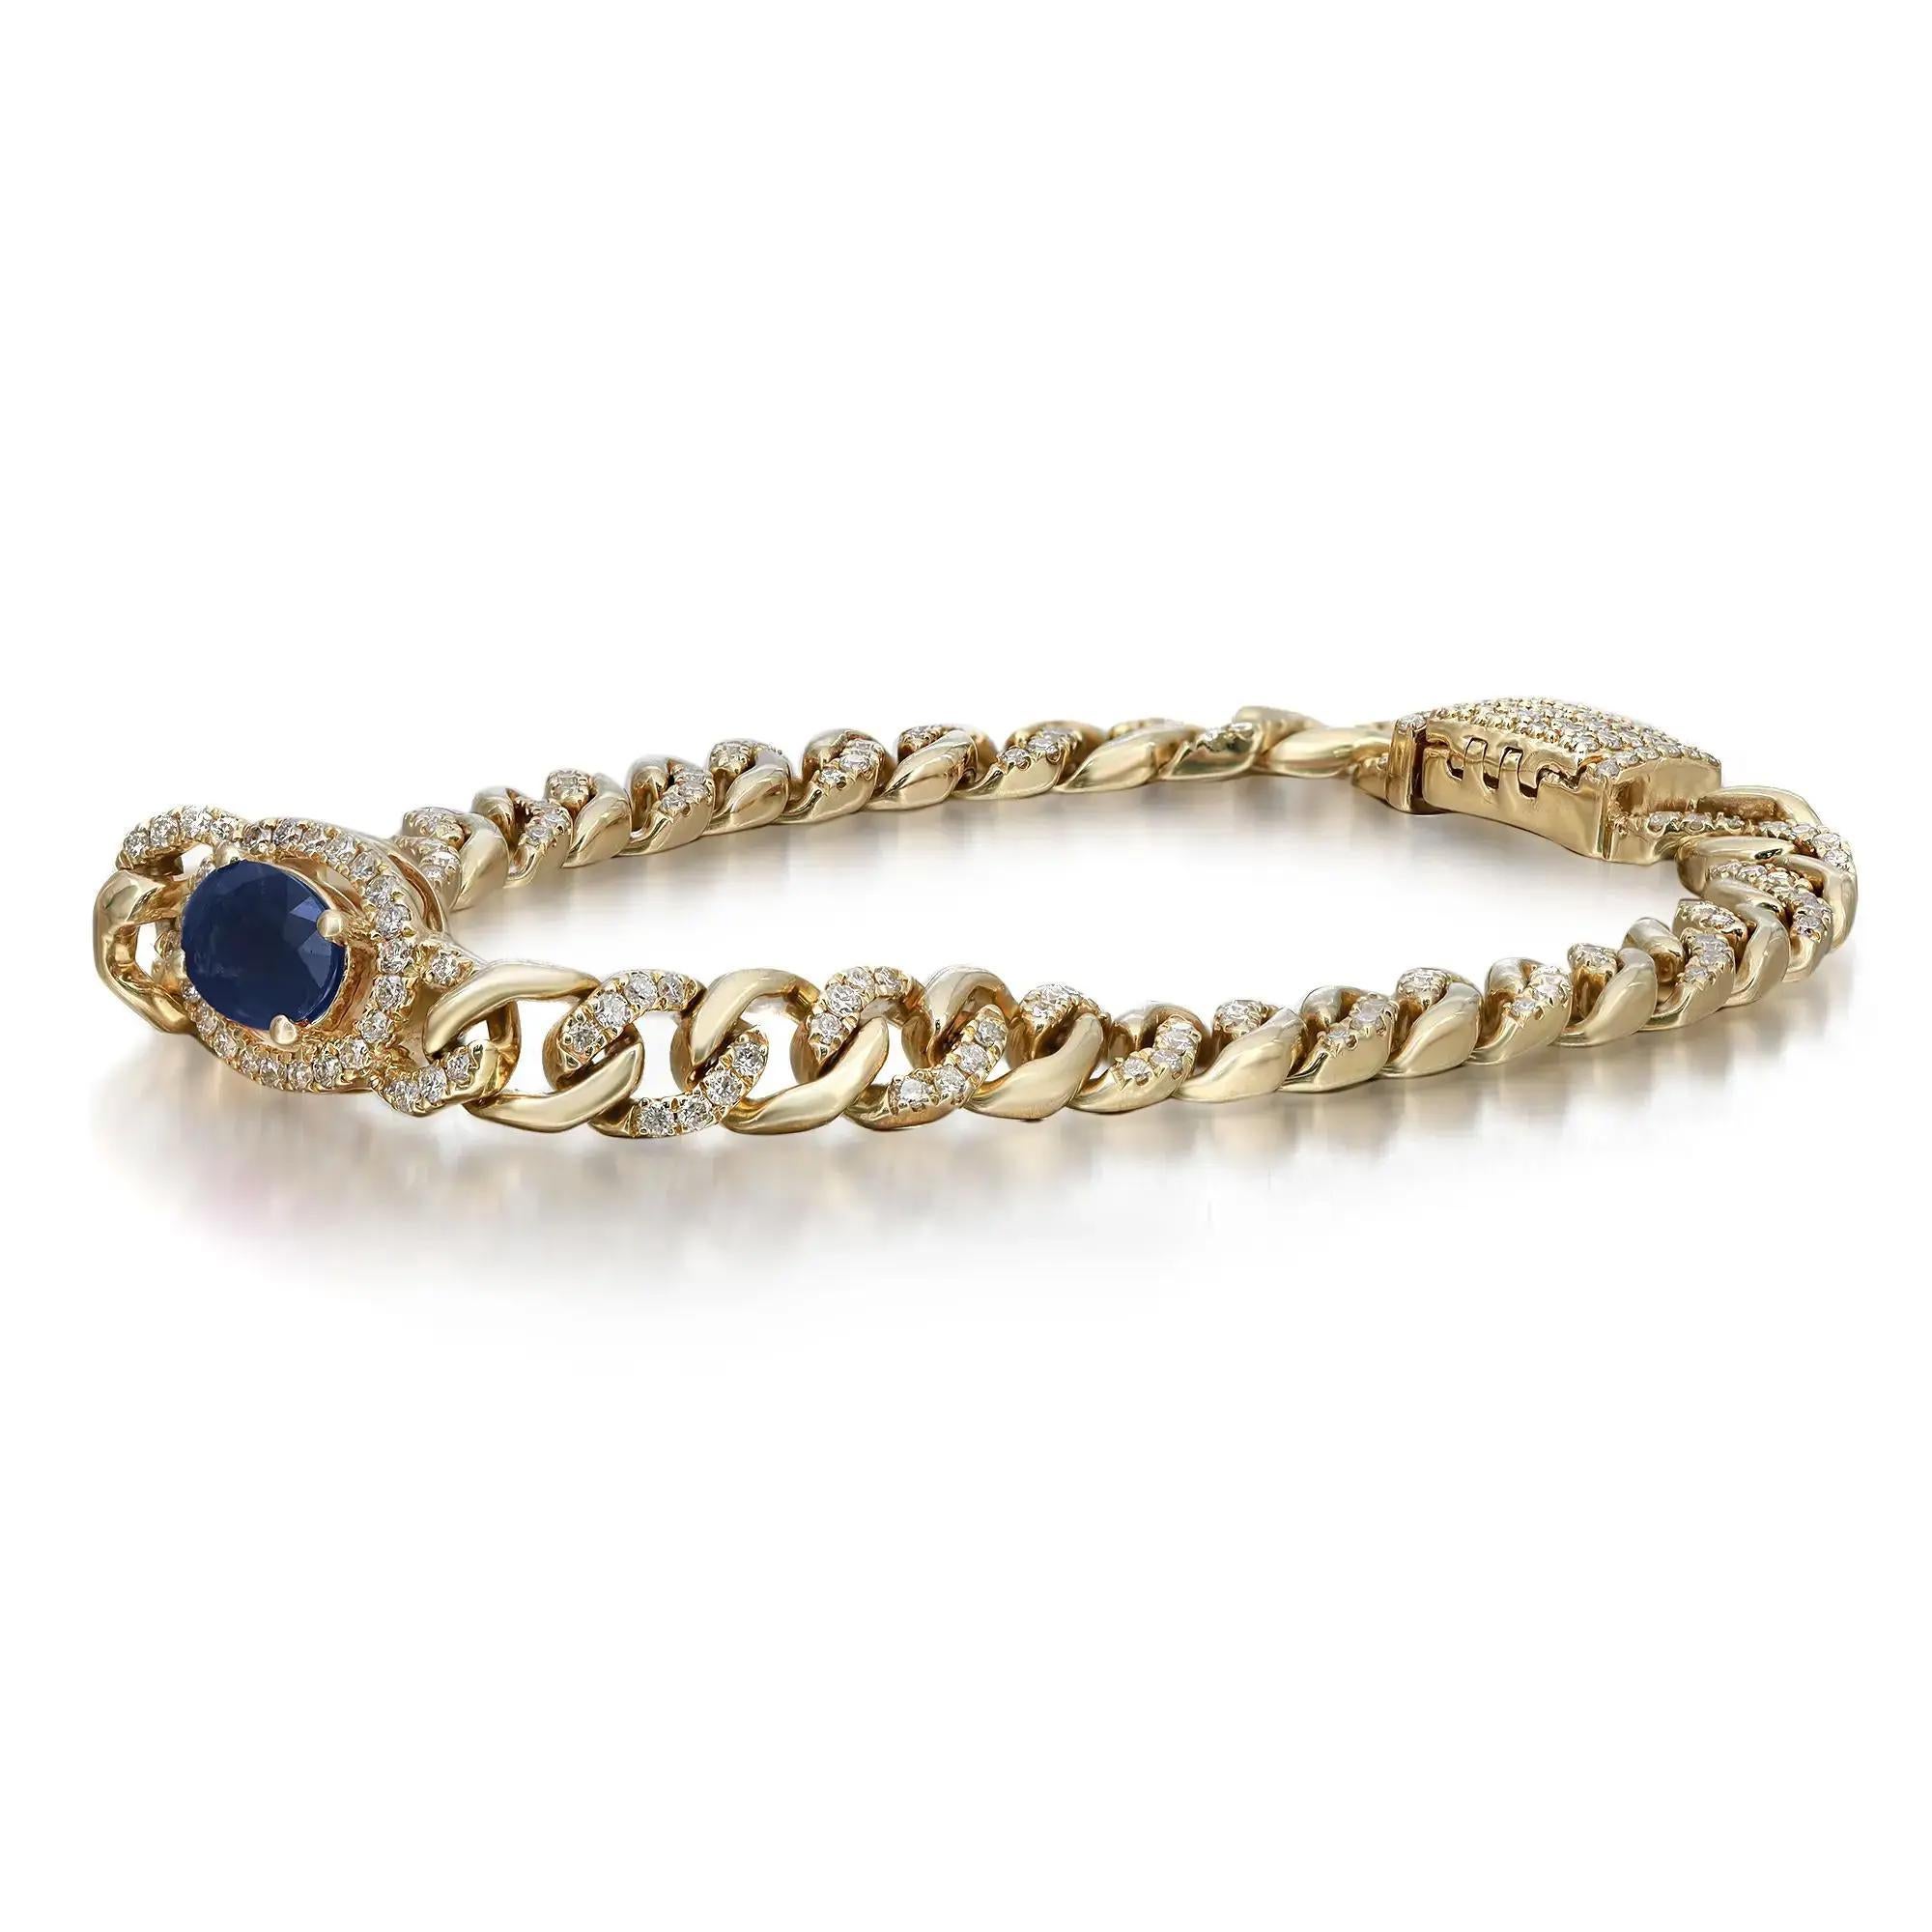 This beautifully crafted chain bracelet features a prong set oval shaped Blue Sapphire in the center with a round cut diamond halo attached to a pave set round diamond studded Cuban link chain. Crafted in 14k yellow gold. Total ruby weight: 0.94